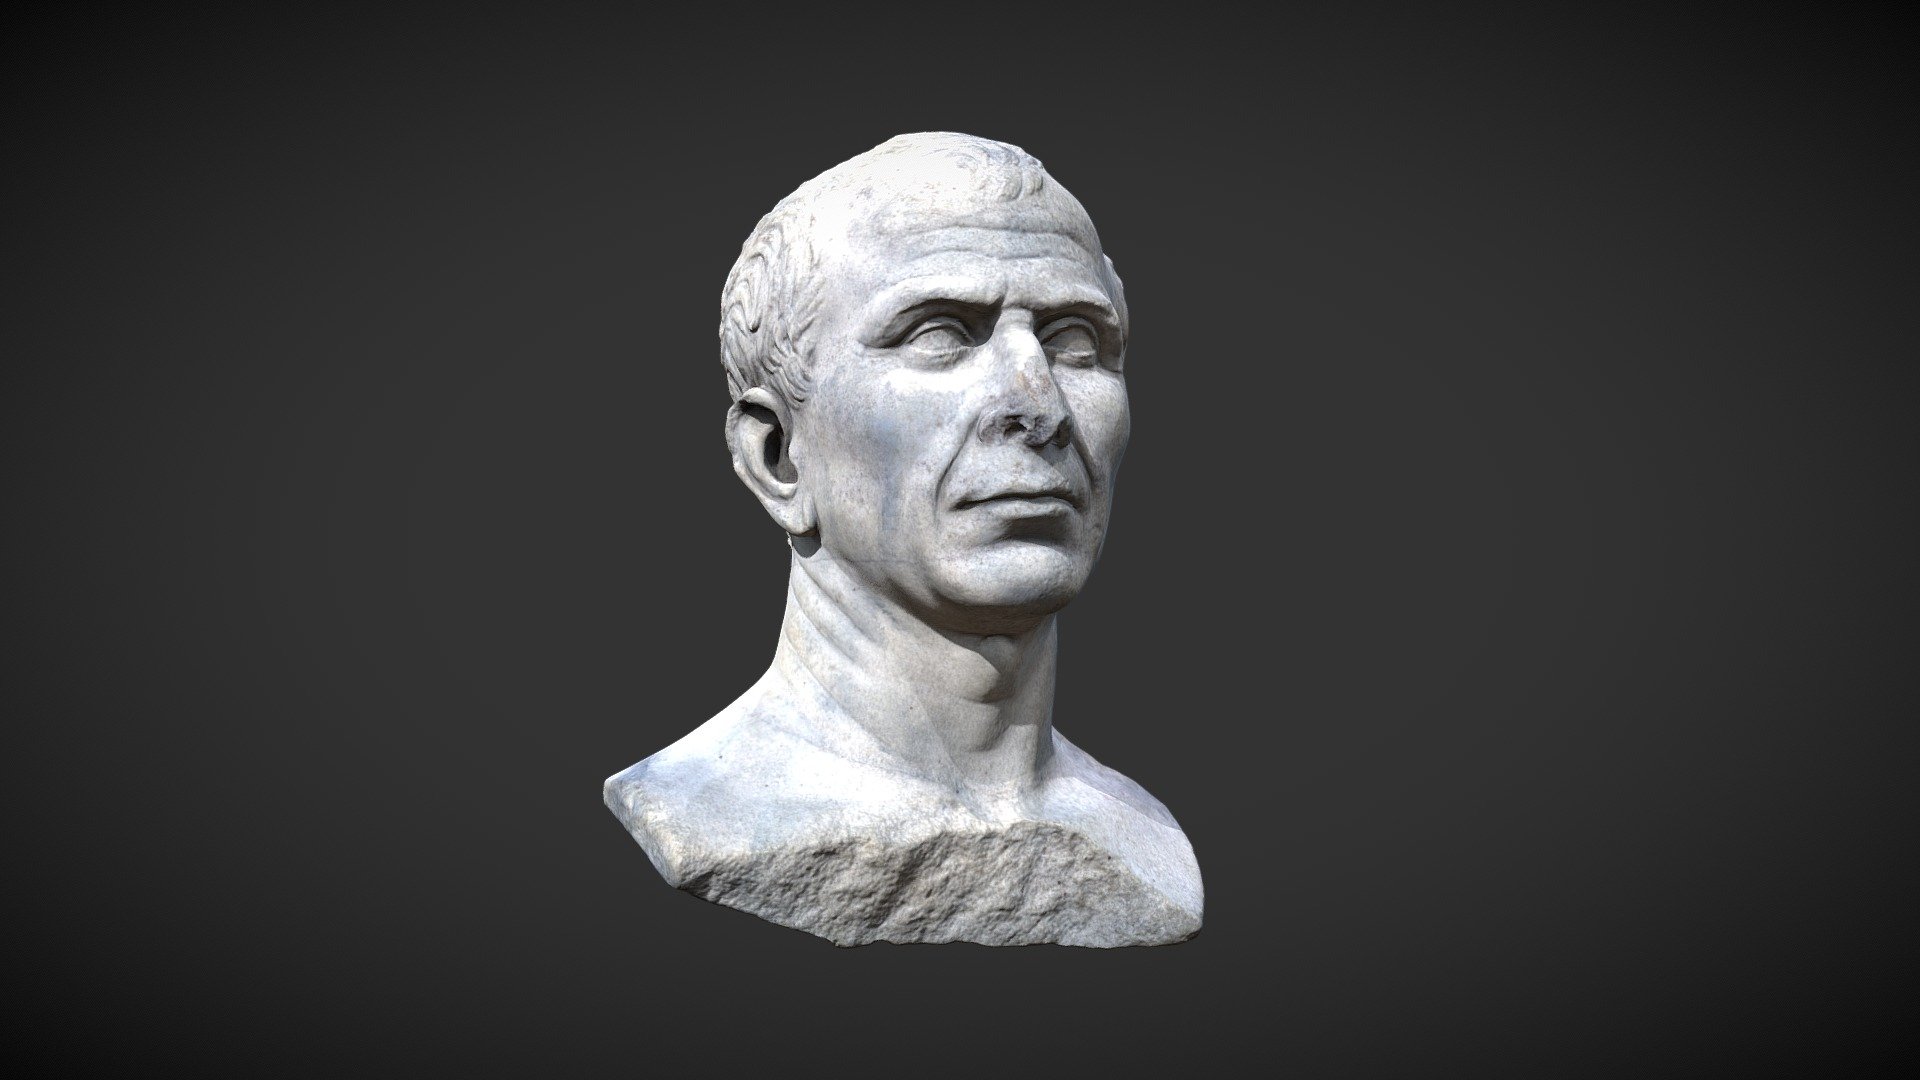 Found in 2007 at Arles, in the Rhône river right bank, this life-size portrait has been cut by an exceptional  sculptor in a high quality marble, most often used for imperial orders. If face presents assumed features of Julius Caesar, lack of inscriptions does not identify it for sure.

Dokimeion marble (Phrygie, current Turkey)

Middle of the 1st c. BC 

Height. 39,5 ; width. 22 ; depth. 18 cm 

Weight : 20,5 kg

Arles, Rhône excavations, 2007

RHO.2007.05.1939 - Presumptive portrait of Julius Caesar - 3D model by Musée départemental Arles antique (@museearlesantique) 3d model